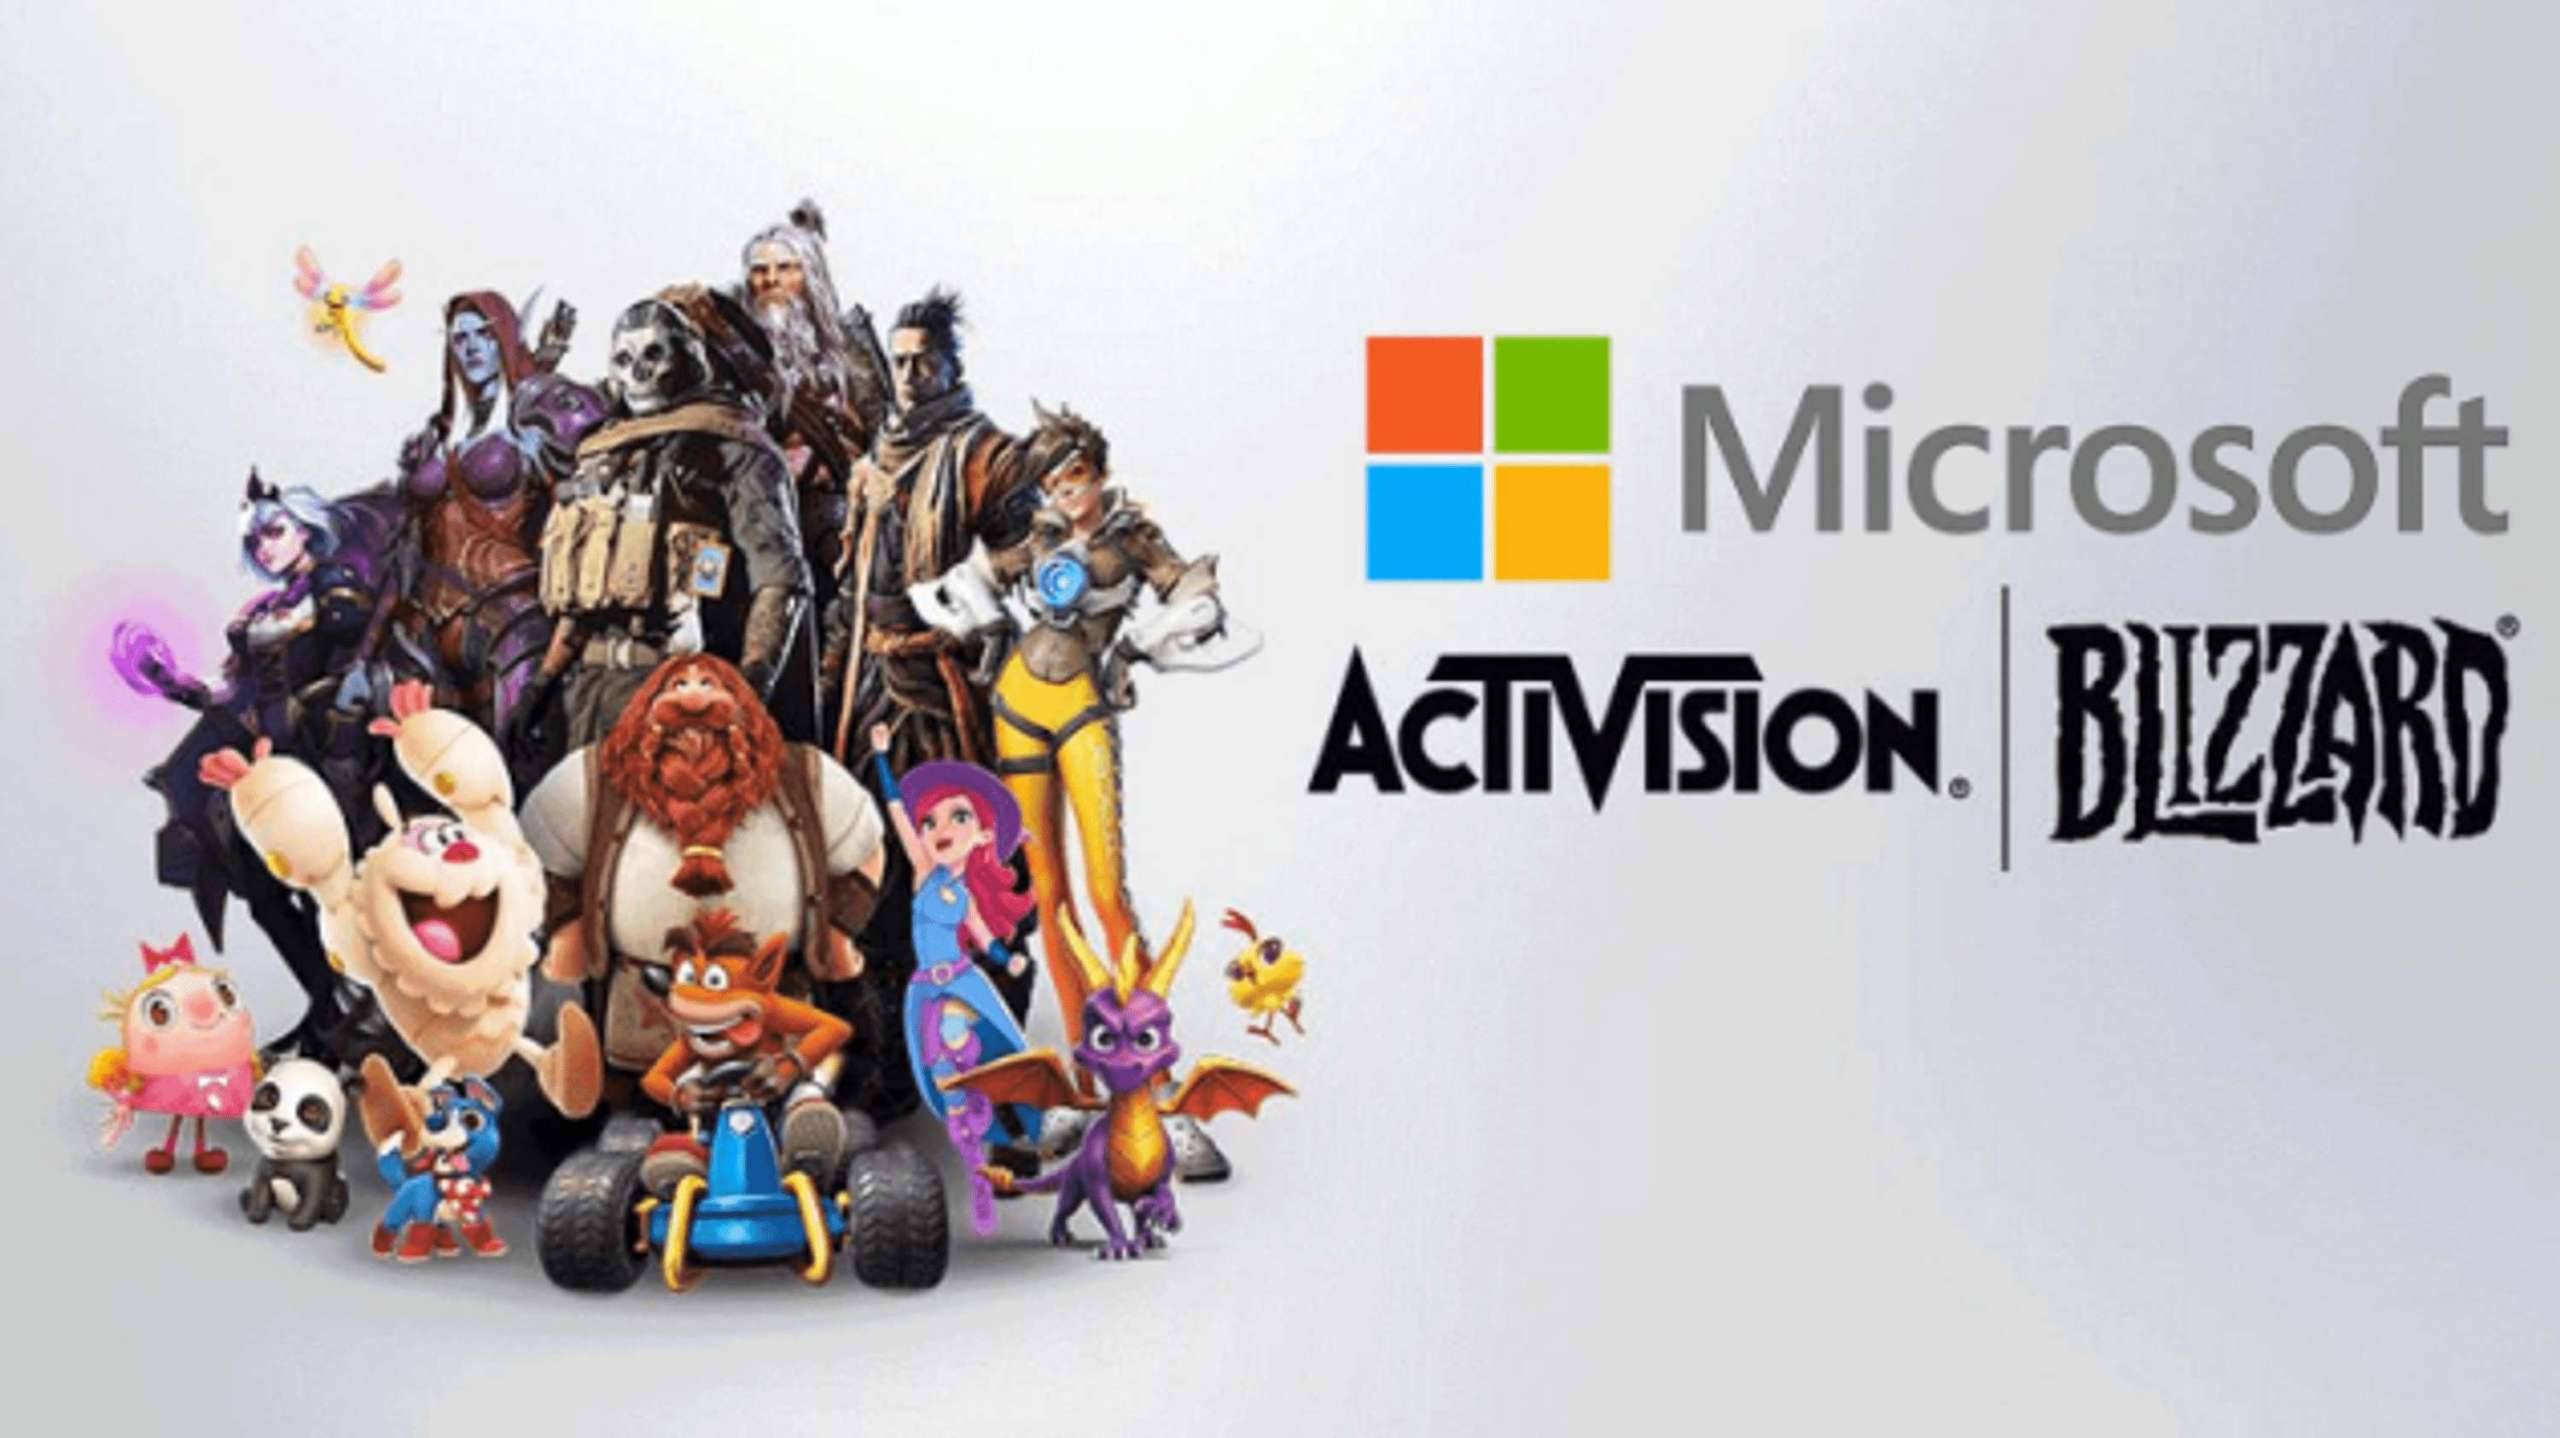 Microsoft Claims That Activision Blizzard’s Games Are Not Particularly Distinctive